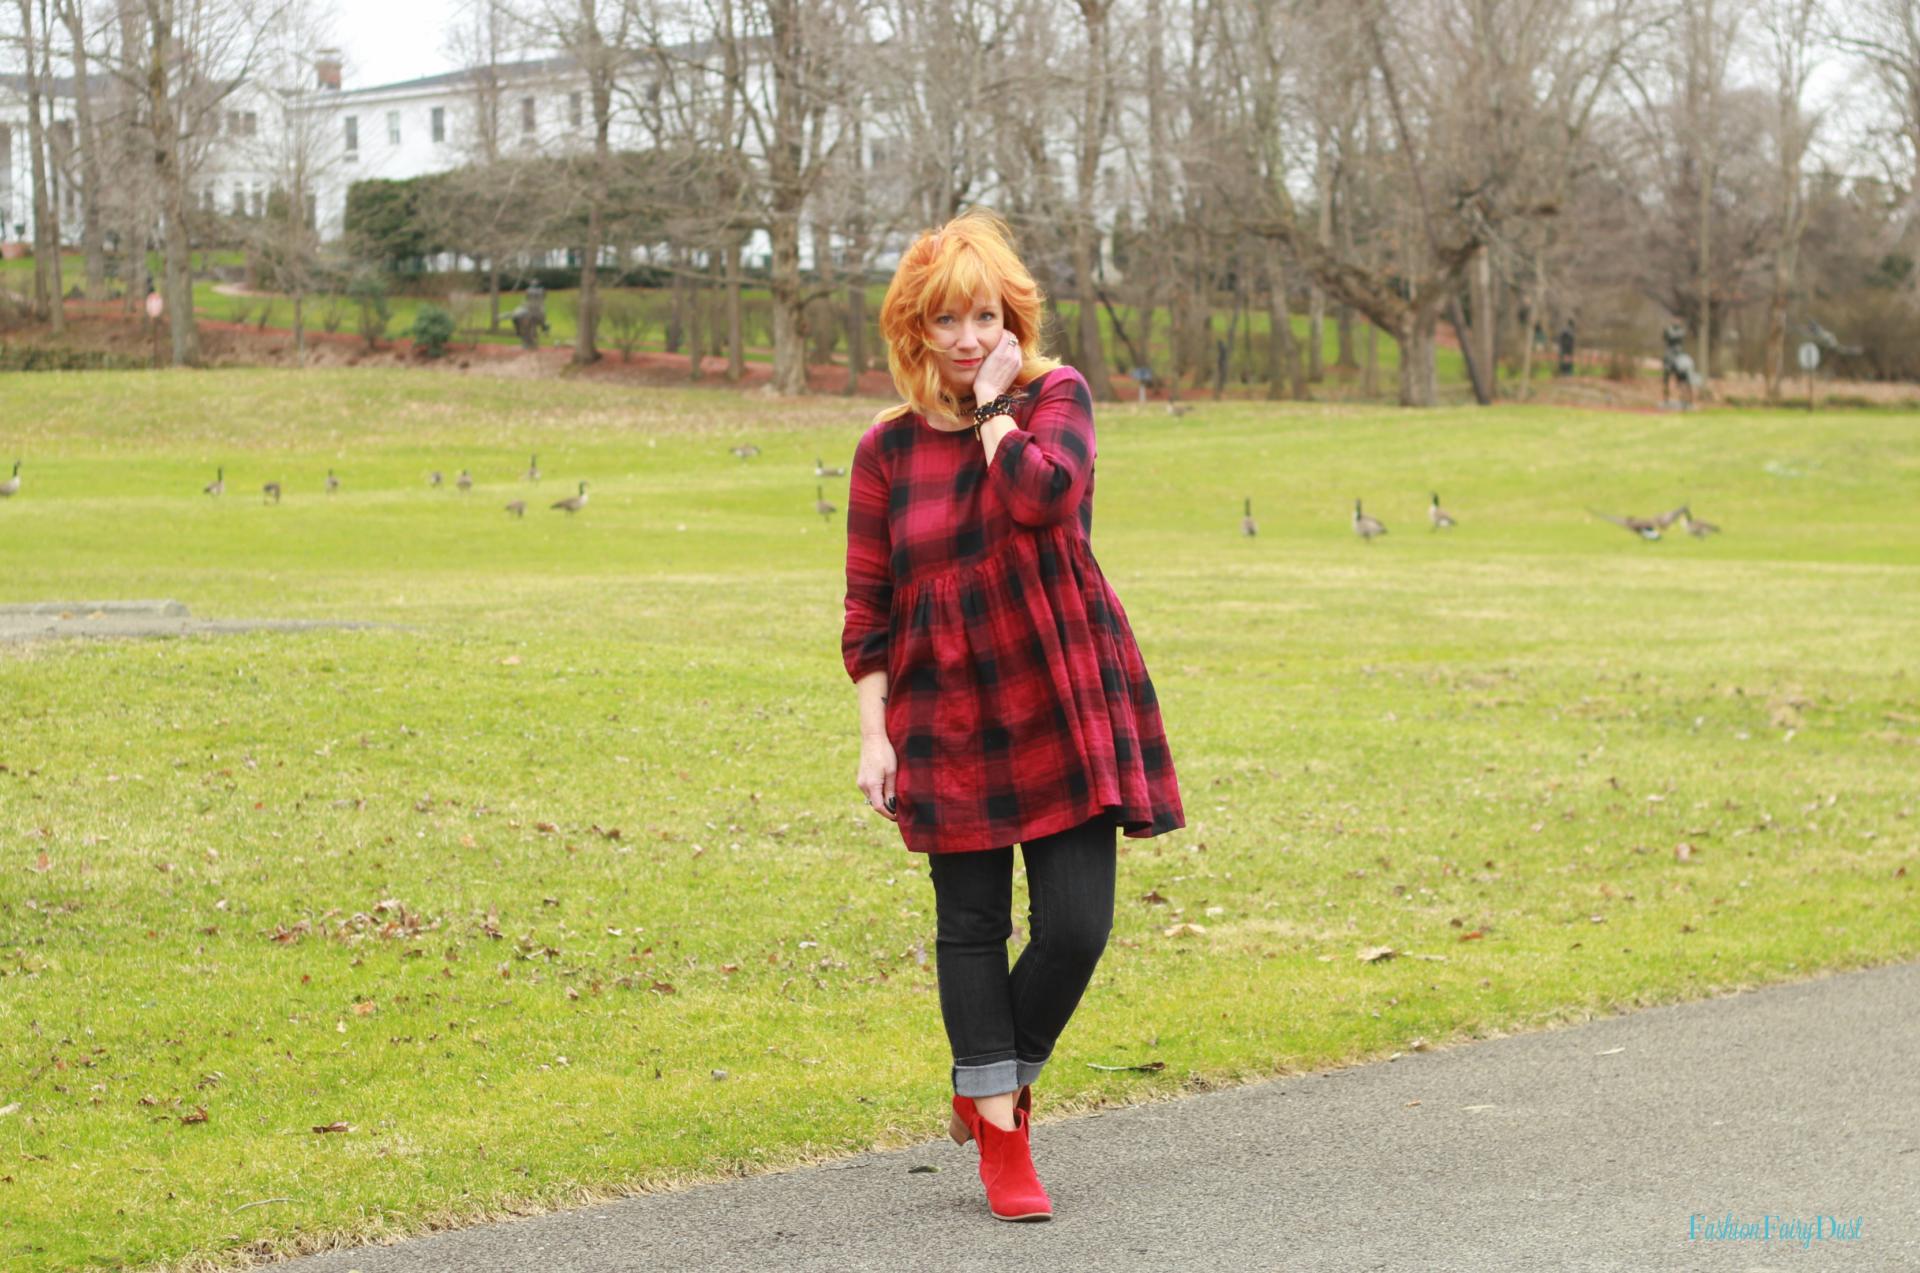 Buffalo plaid tunic, black skinny jeans and red ankle boots. Casual style.